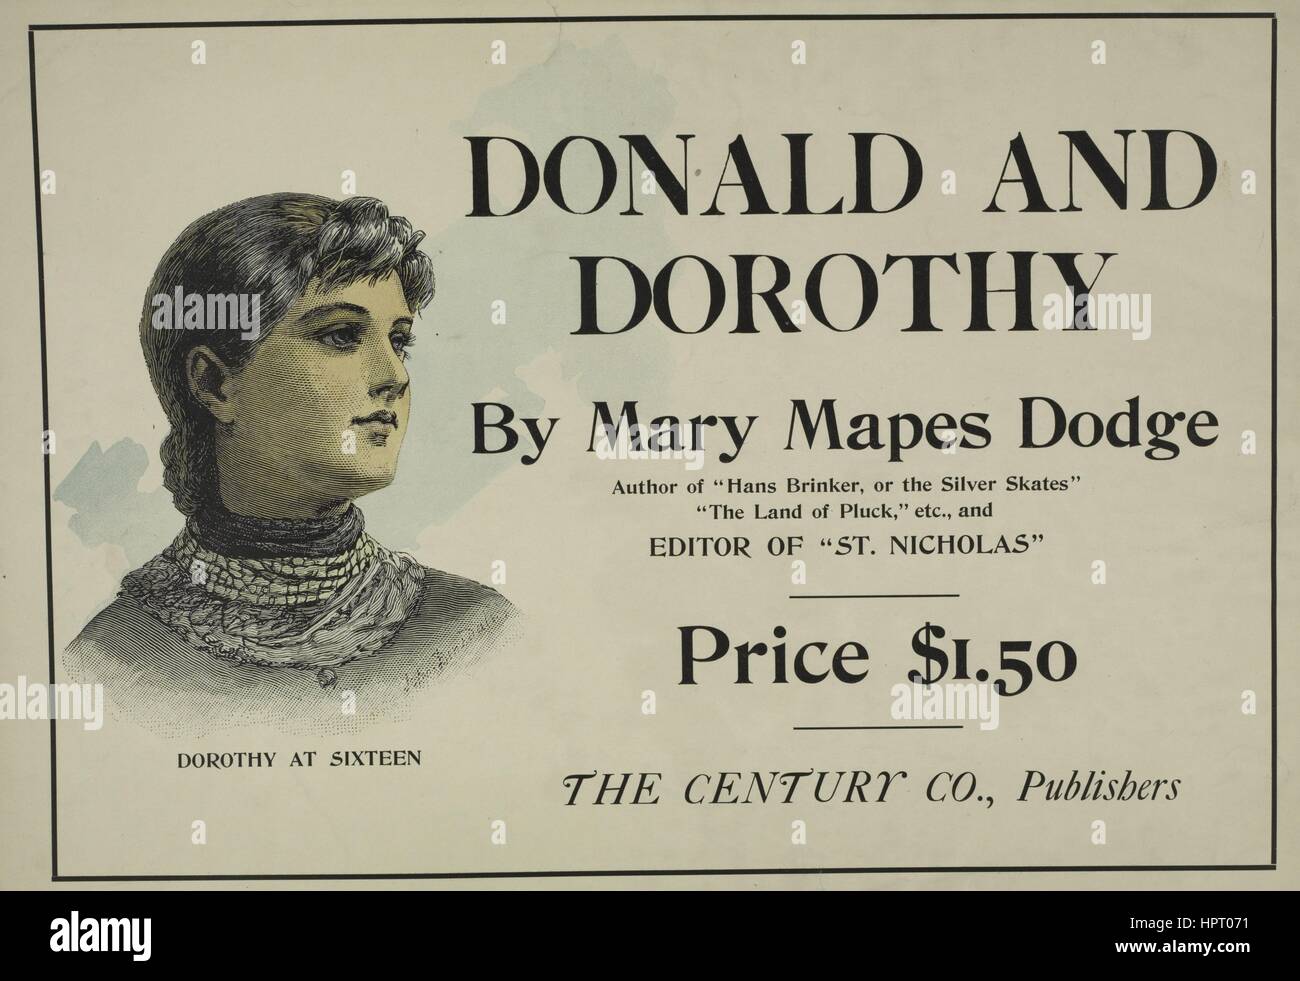 Poster advertisement for a book titled Donald and Dorothy by Mary Mapes Dodge which depicts a shoulders up portrait of a woman looking towards the right, 1902. From the New York Public Library. Stock Photo